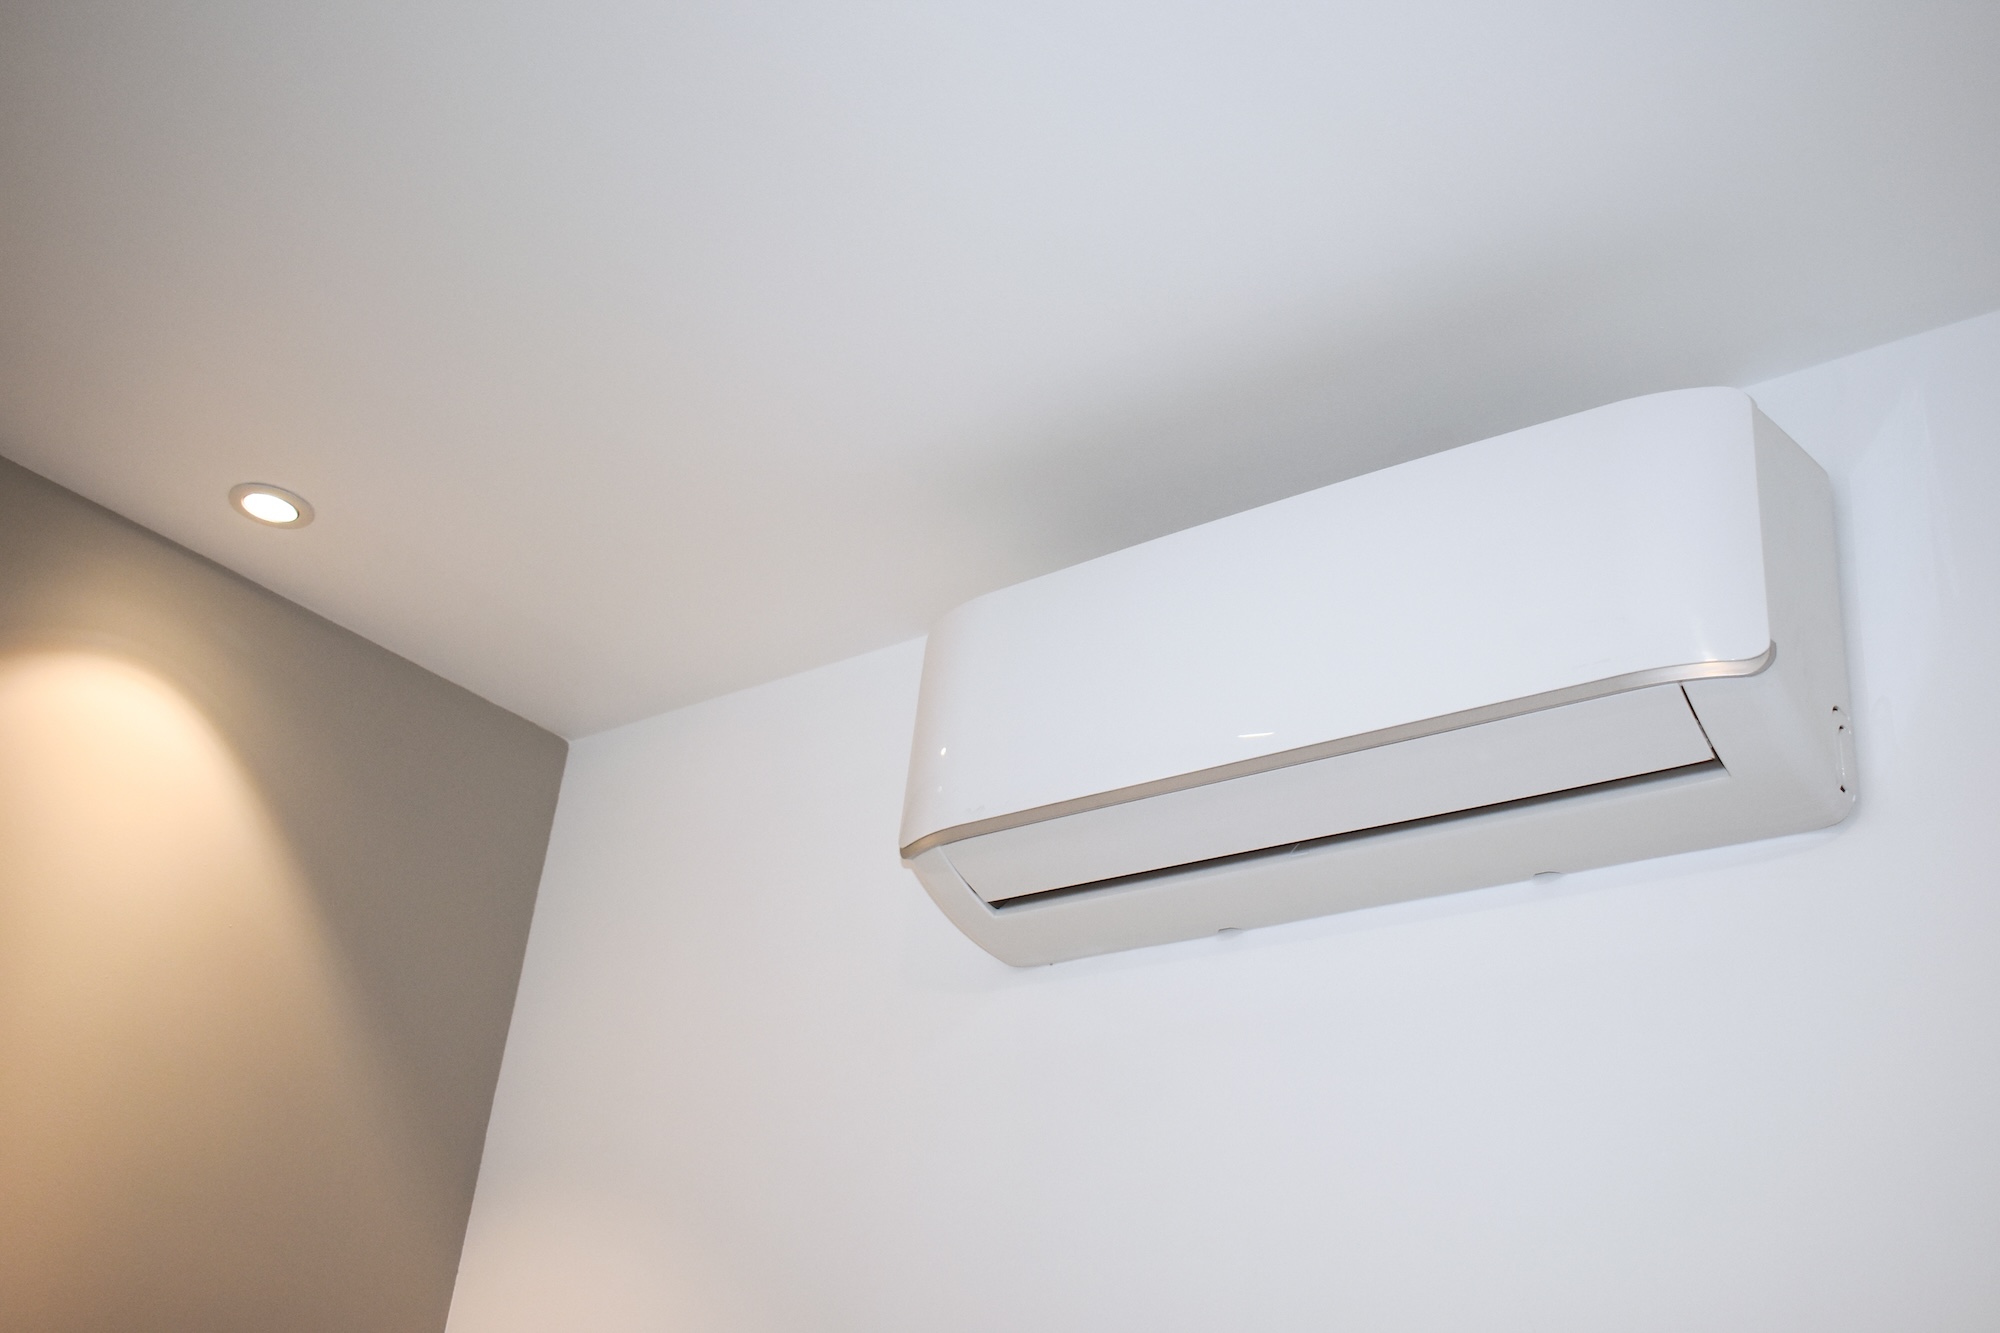 Ductless mini split within interior of home